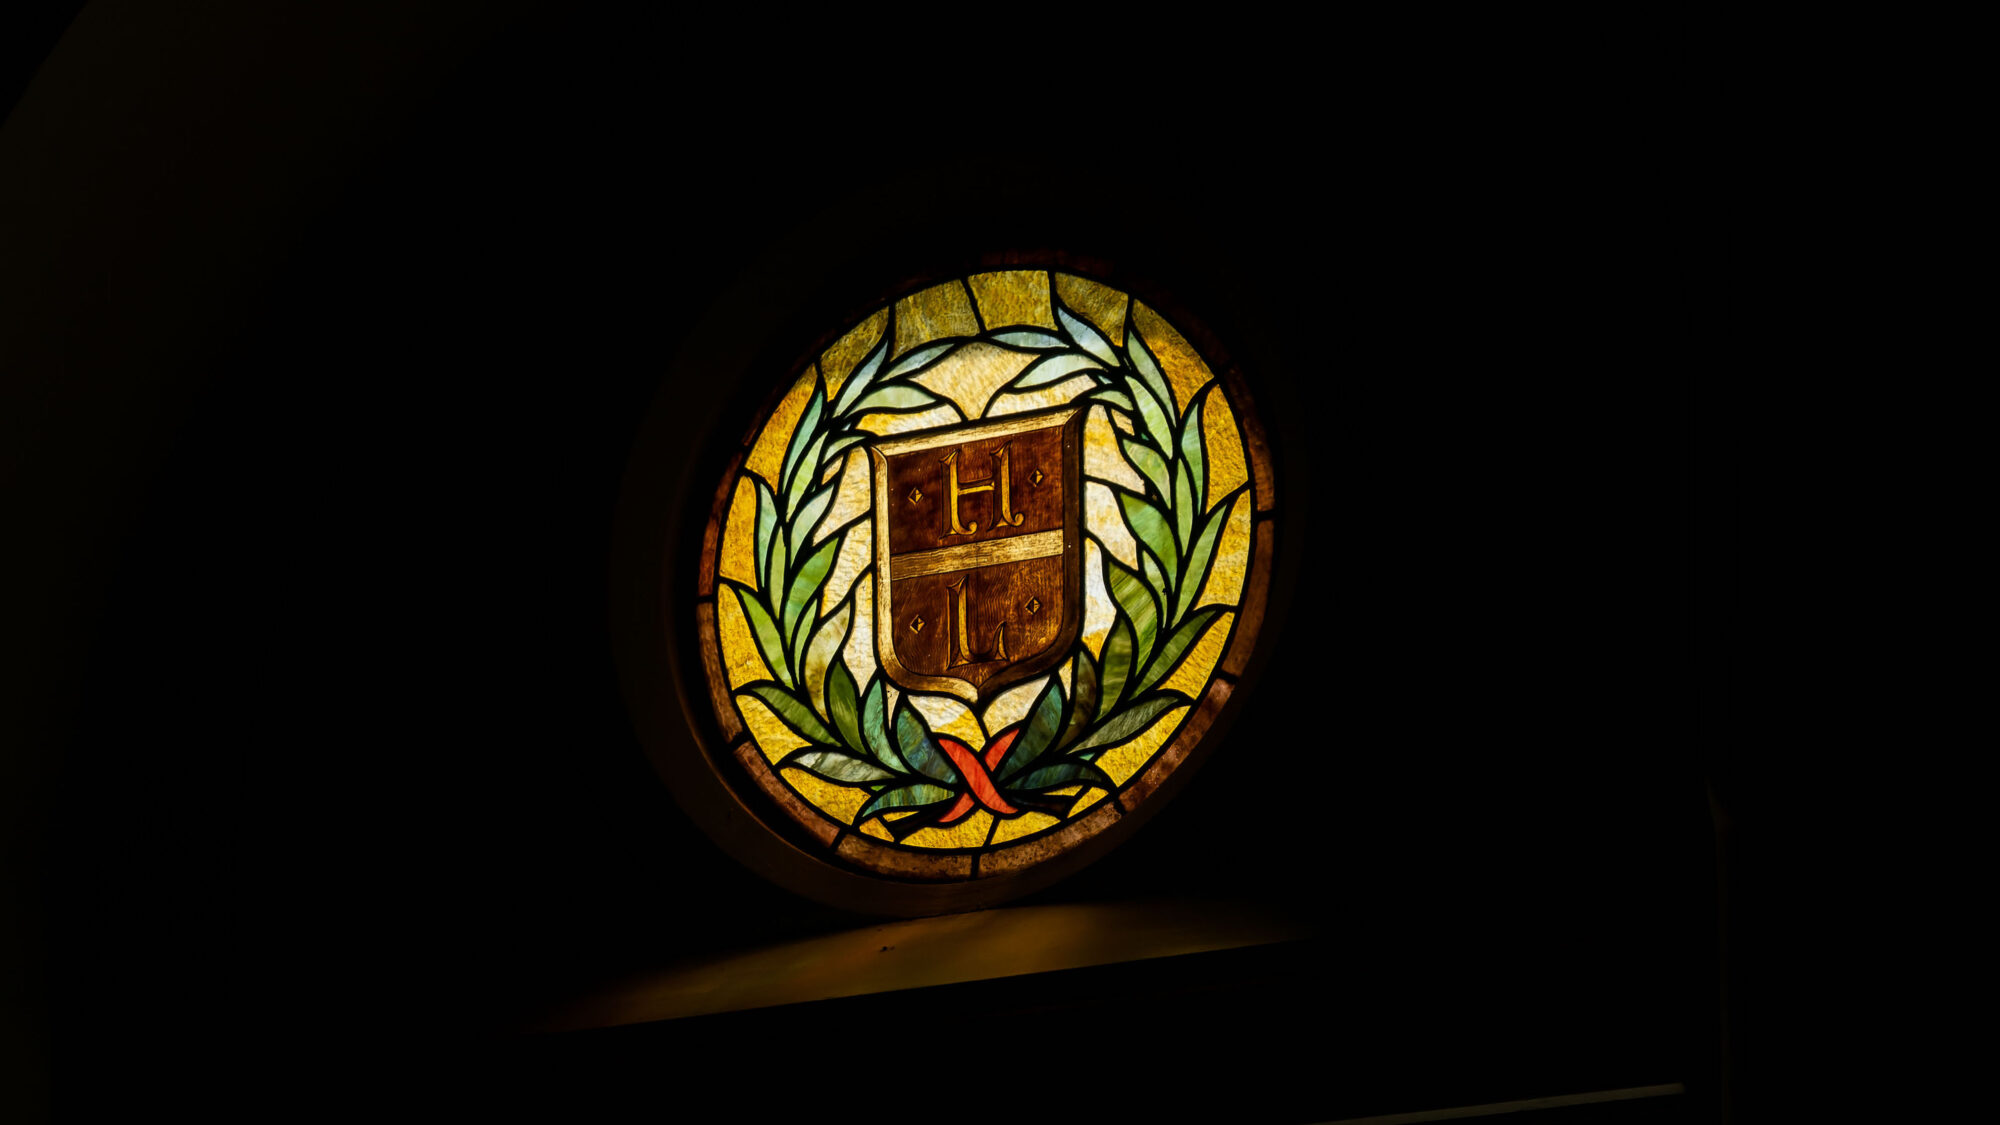 A stained glass window glows colorfully against a dark background